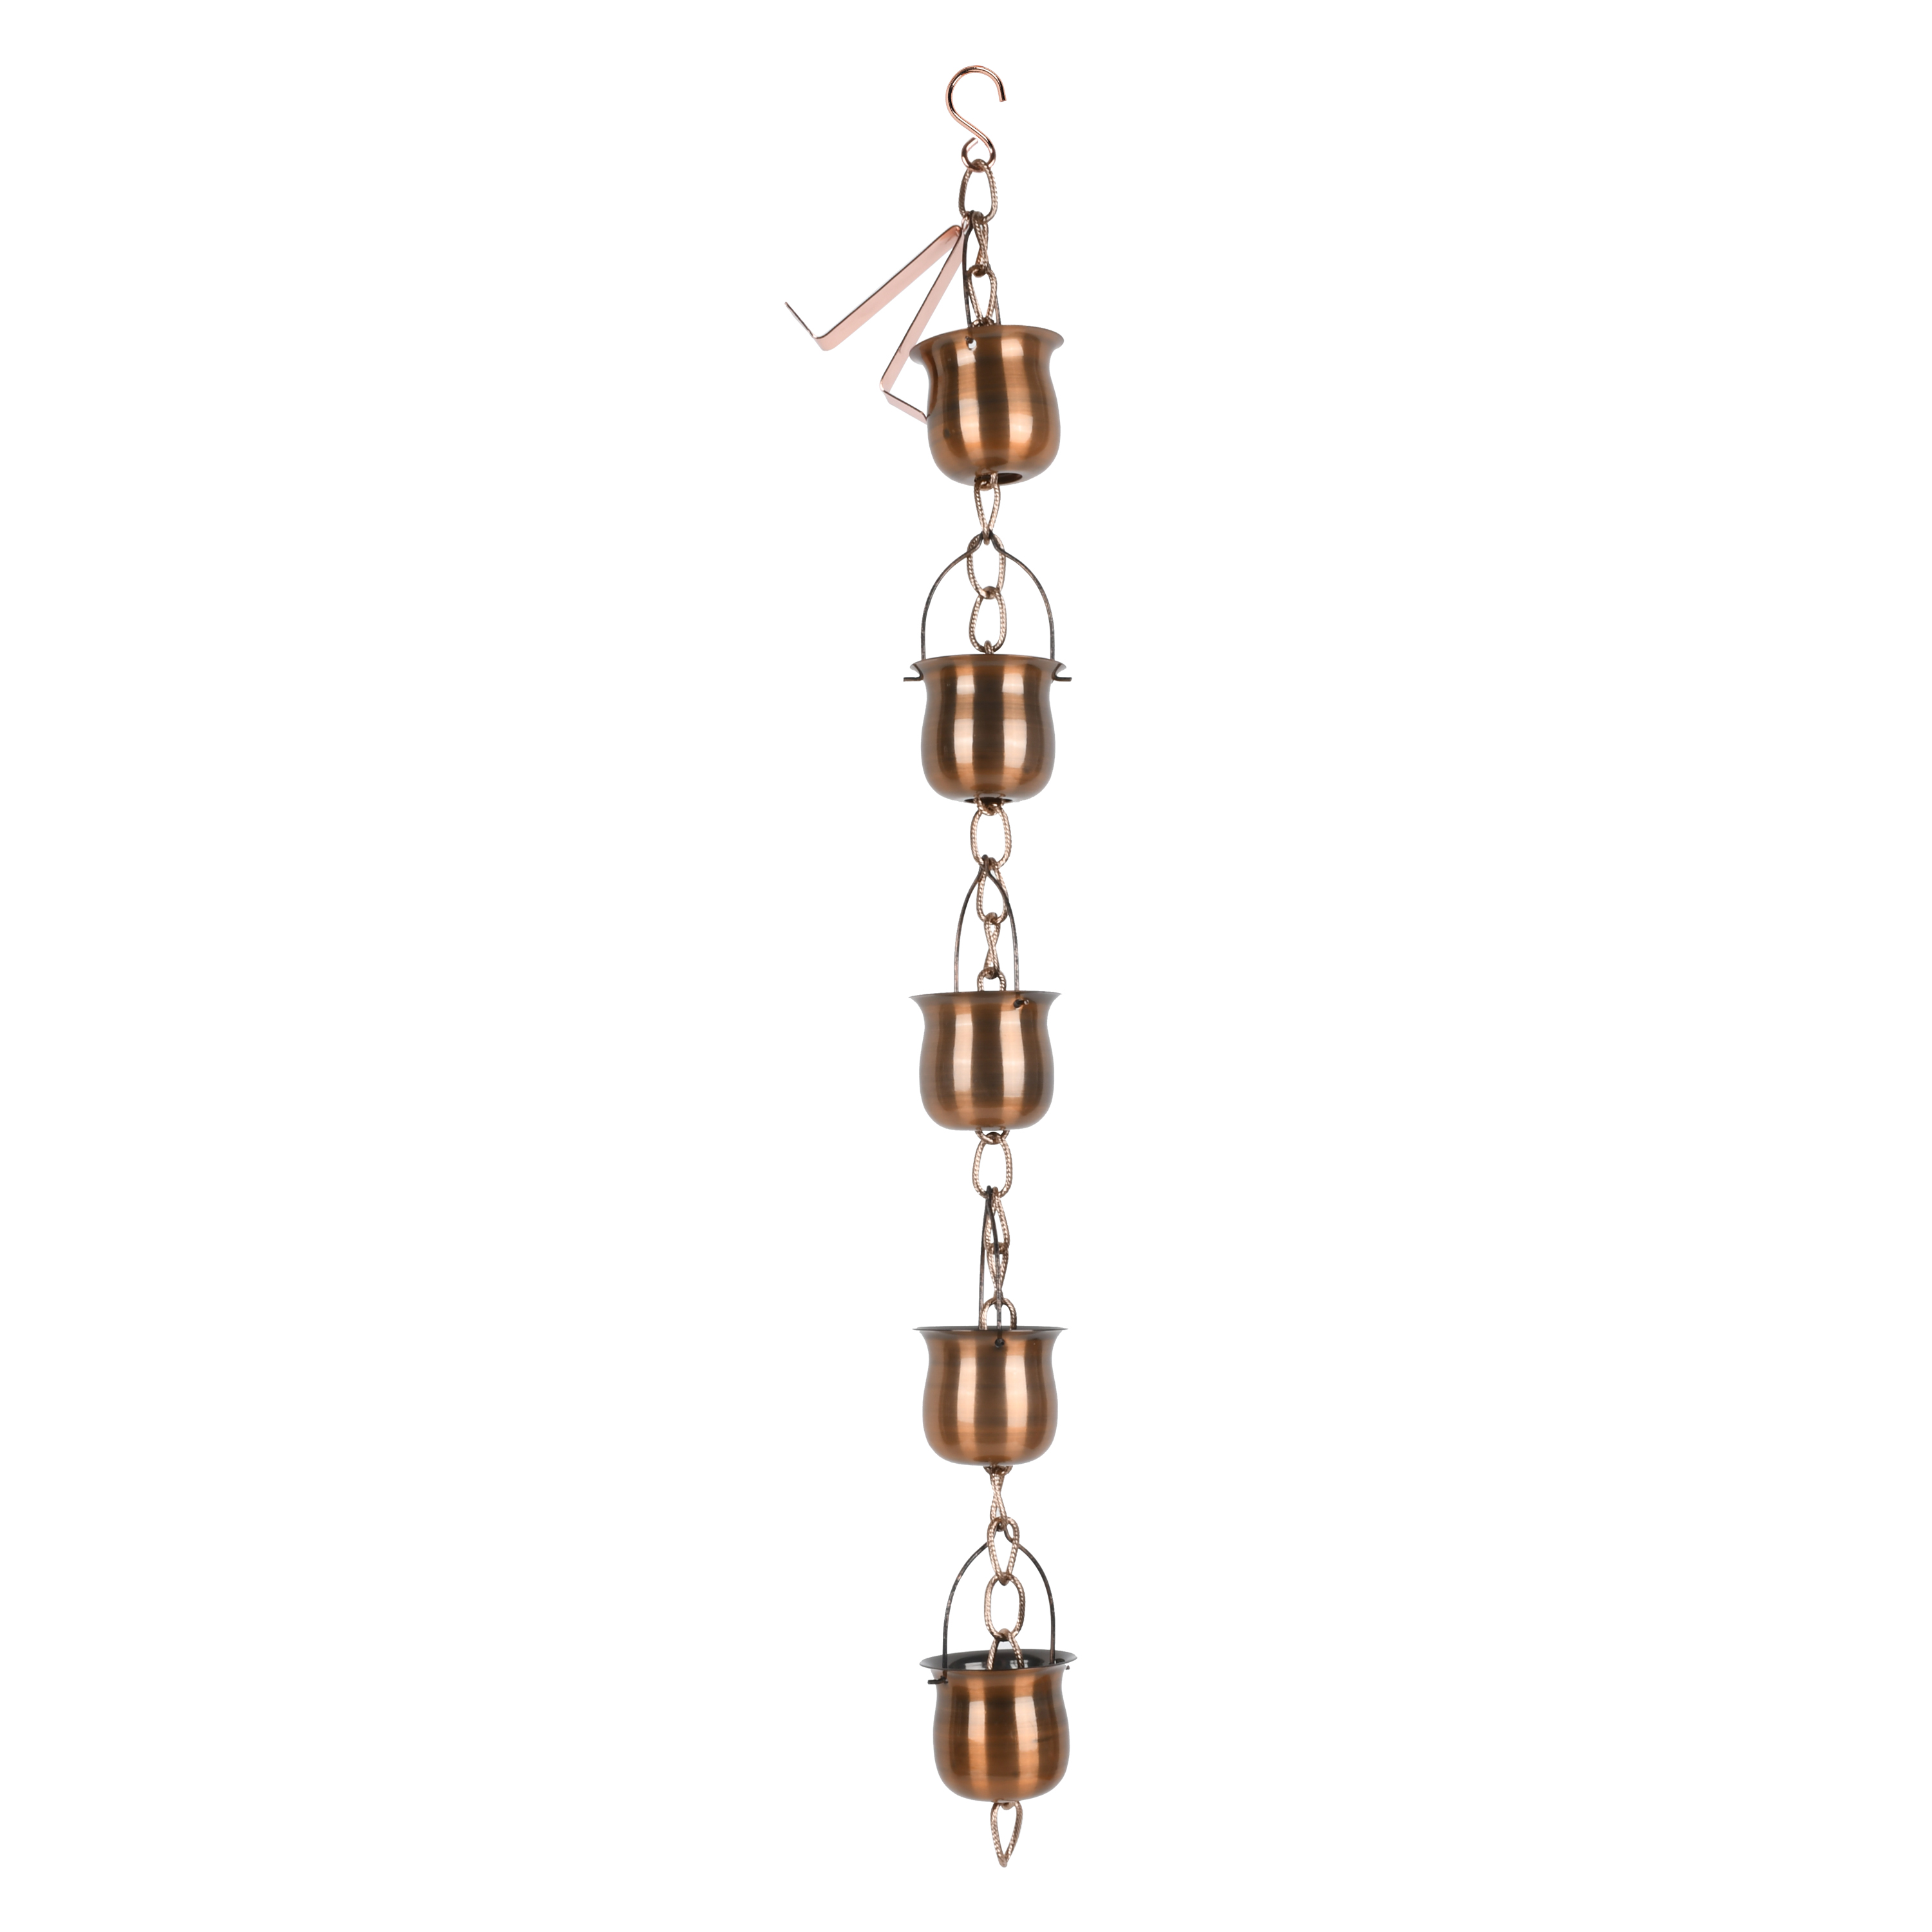 Mainstays Outdoor 29" Metal Weathered Copper Rain Chain